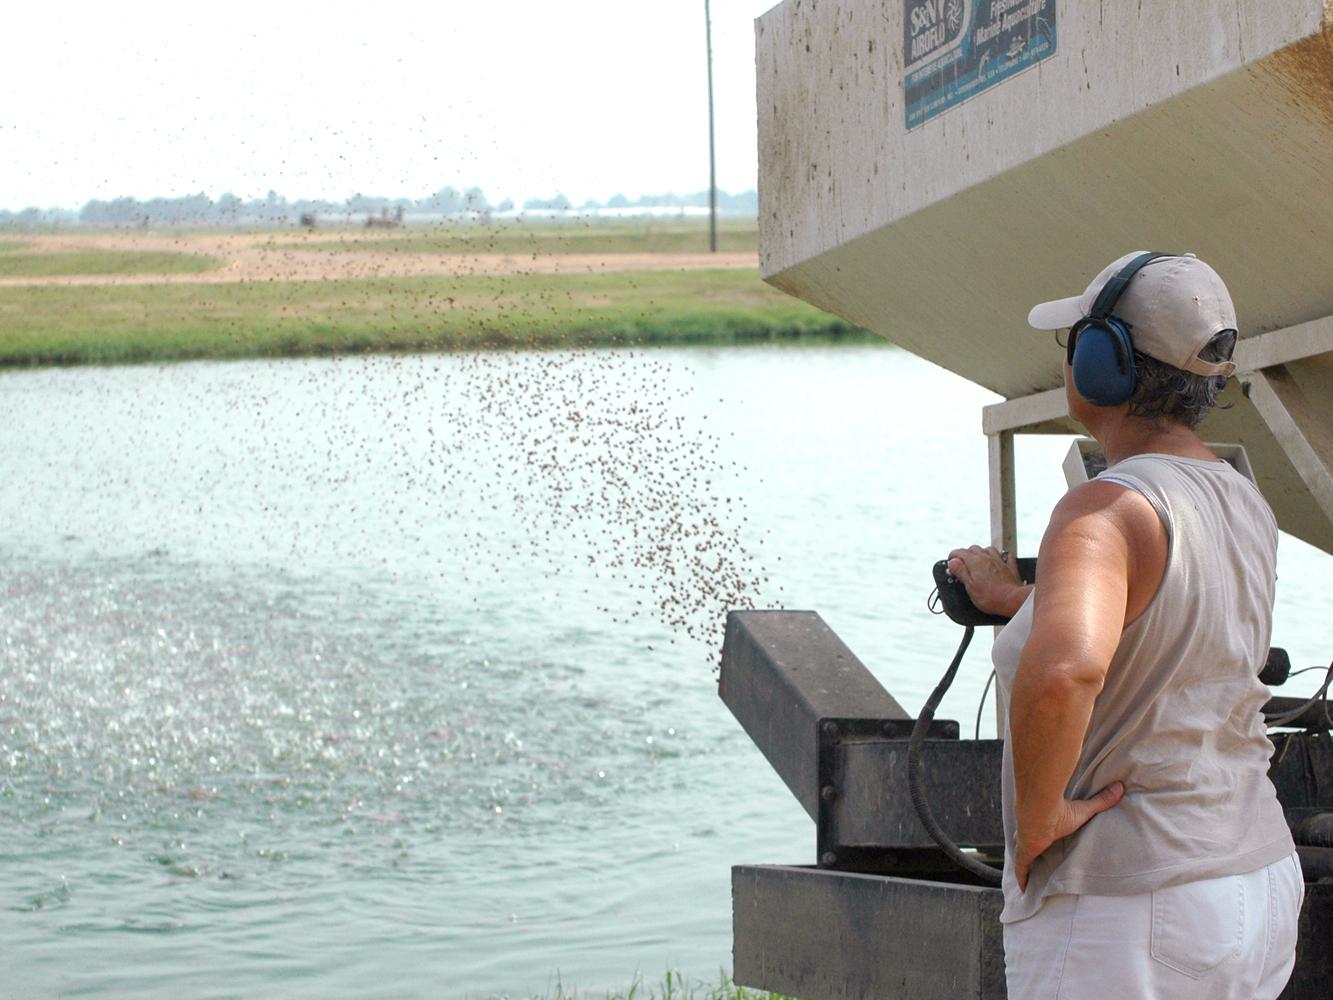 Catfish that are bringing record high prices consume feed, which is also at its highest levels. Sue Kingsbury, now a retired Mississippi State University researcher, is feeding catfish in a pond at the Delta Research and Extension Center in Stoneville. Catfish feed, which is the biggest production expense, has increased 120 percent in the last decade. (File photo by Rebekah Ray)